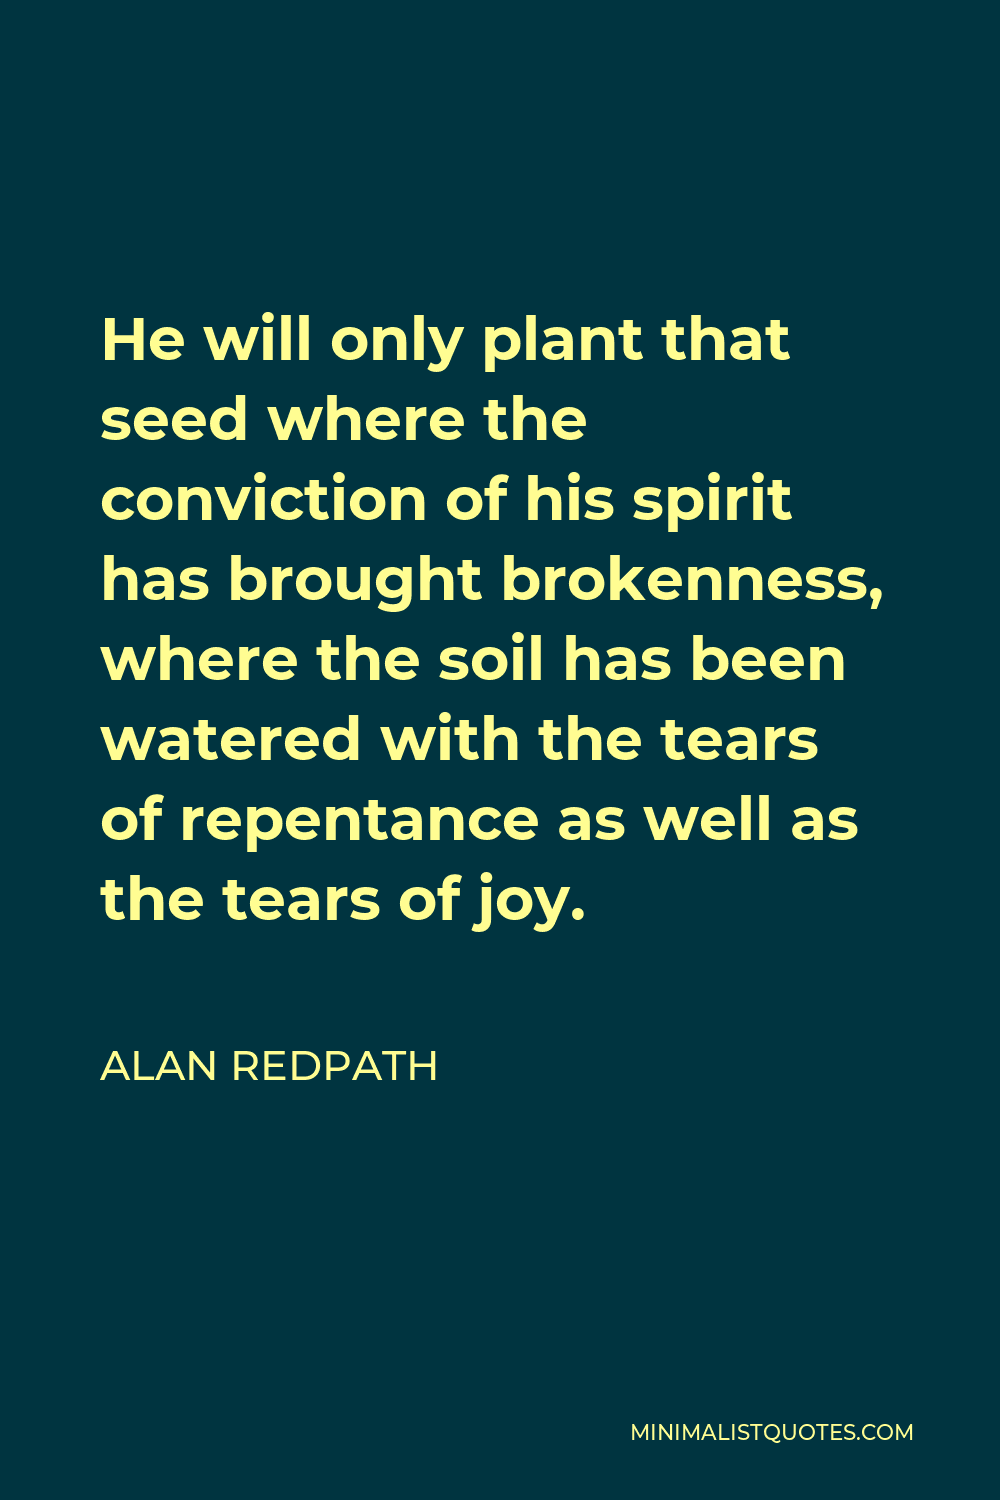 Alan Redpath Quote - He will only plant that seed where the conviction of his spirit has brought brokenness, where the soil has been watered with the tears of repentance as well as the tears of joy.